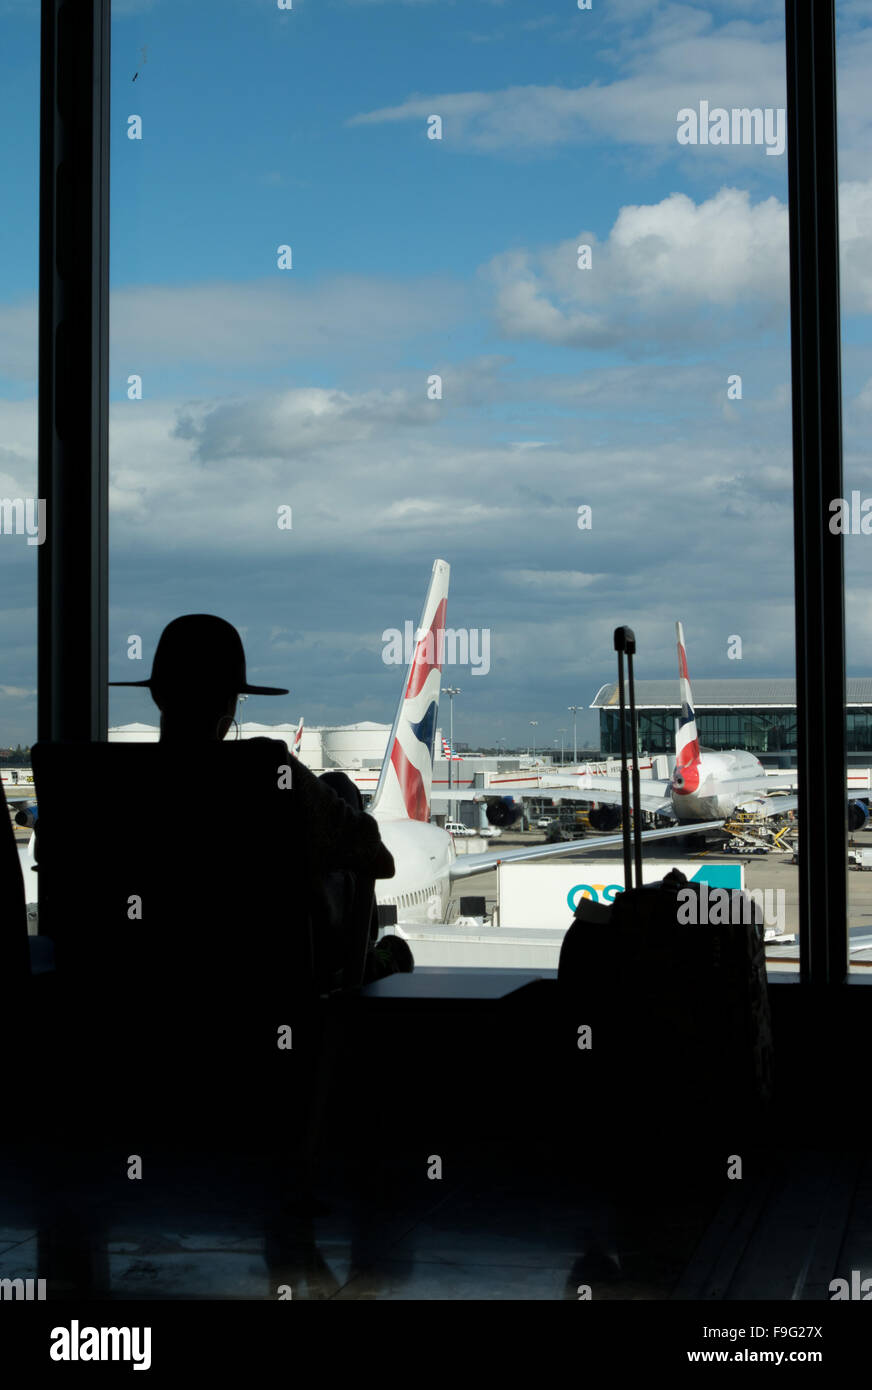 Silhouette of a female passenger sitting by the window. Stock Photo